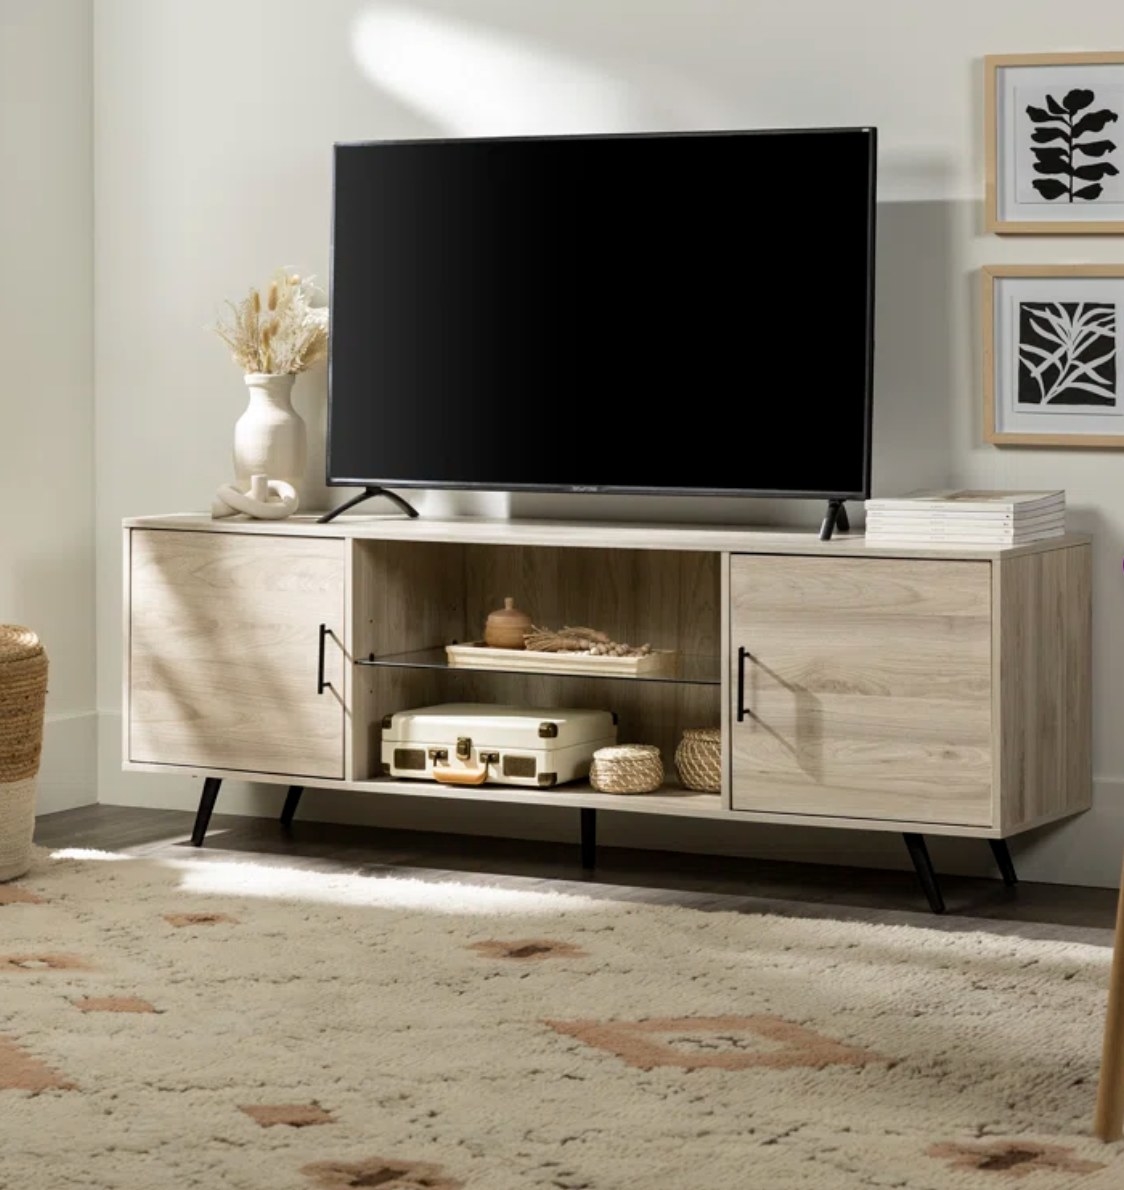 The TV stand on display